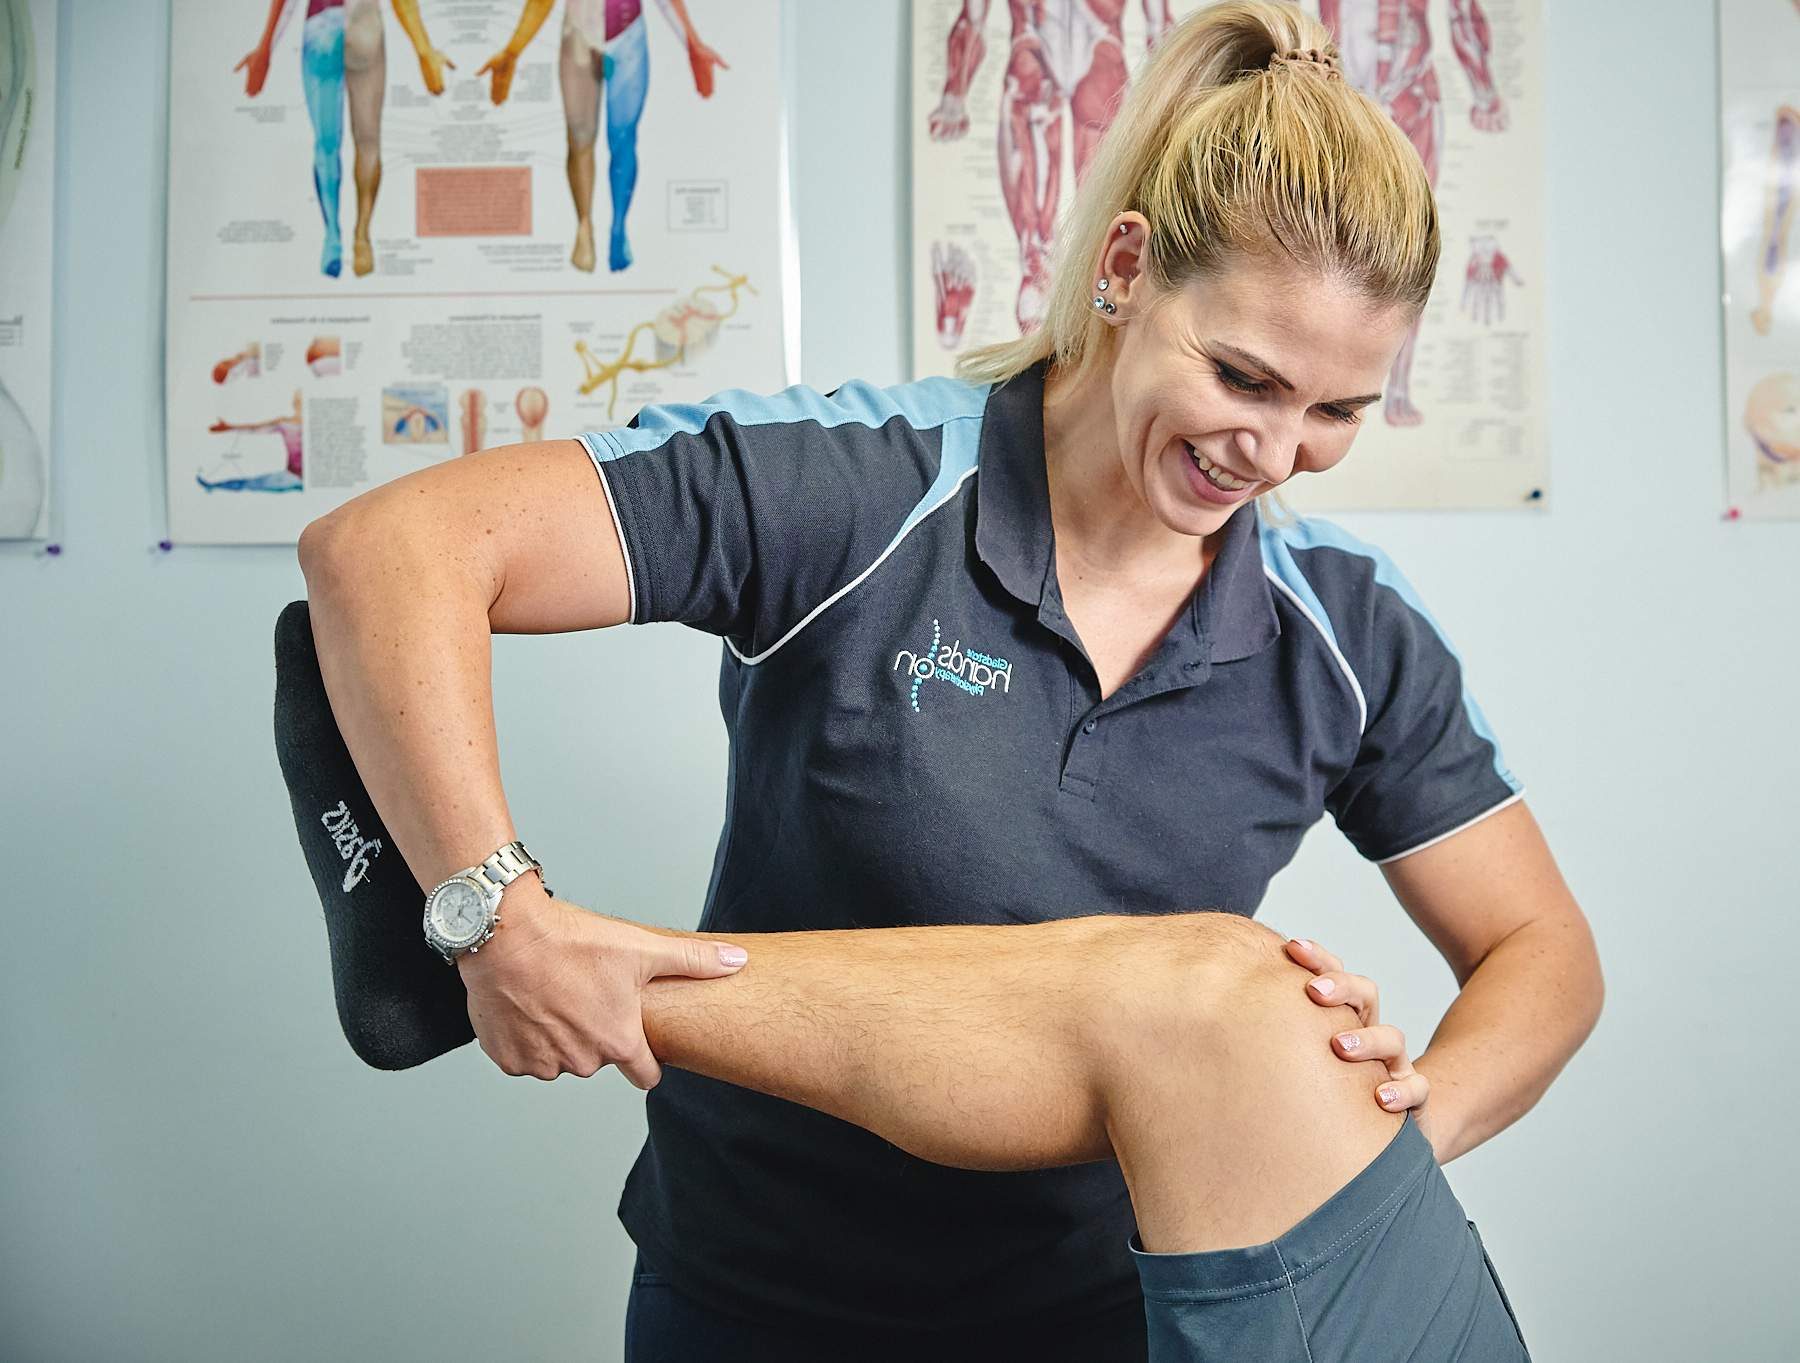 Locally Trusted Gladstone Physiotherapy Practice Gladstone Hands On Physiotherapy